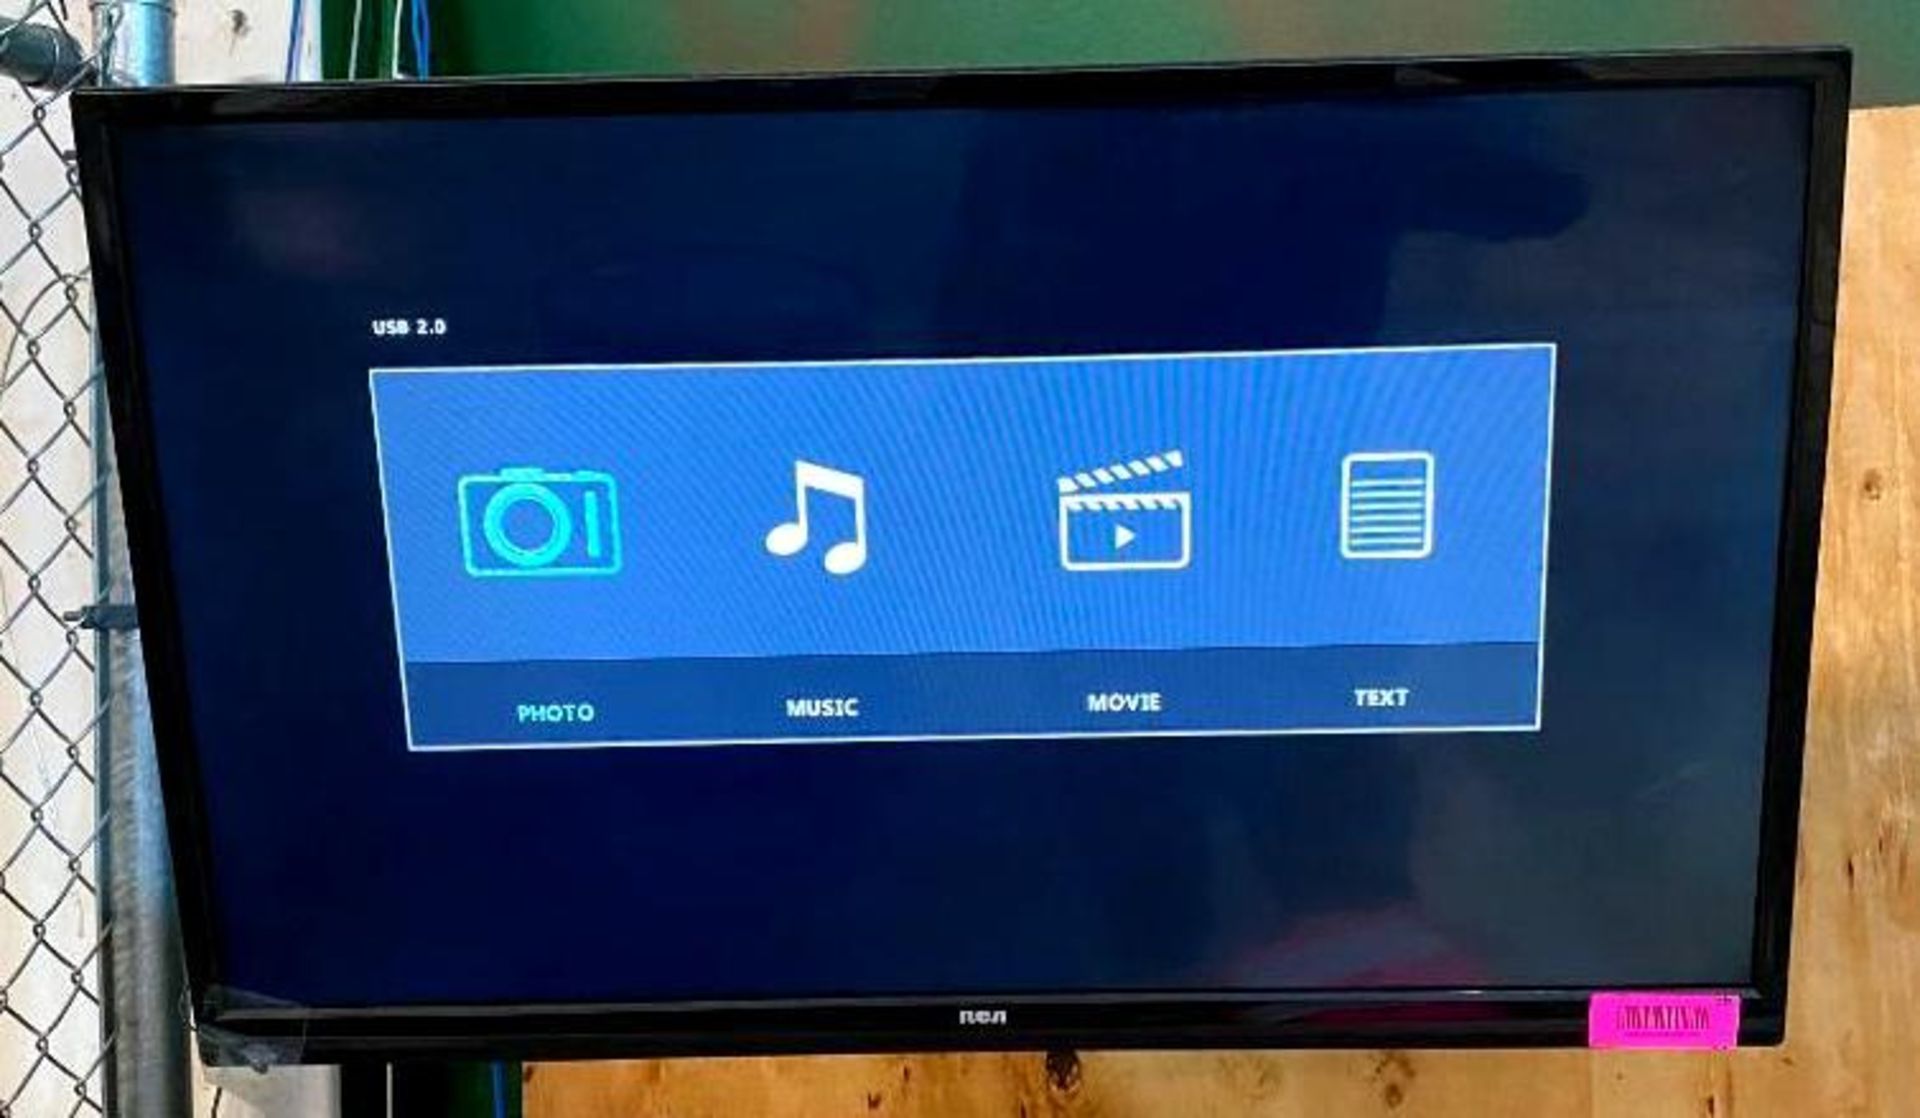 DESCRIPTION: 32" LED TV WITH RASPBERRY PI AND MOUNT BRAND / MODEL: RCA ADDITIONAL INFORMATION: GREAT